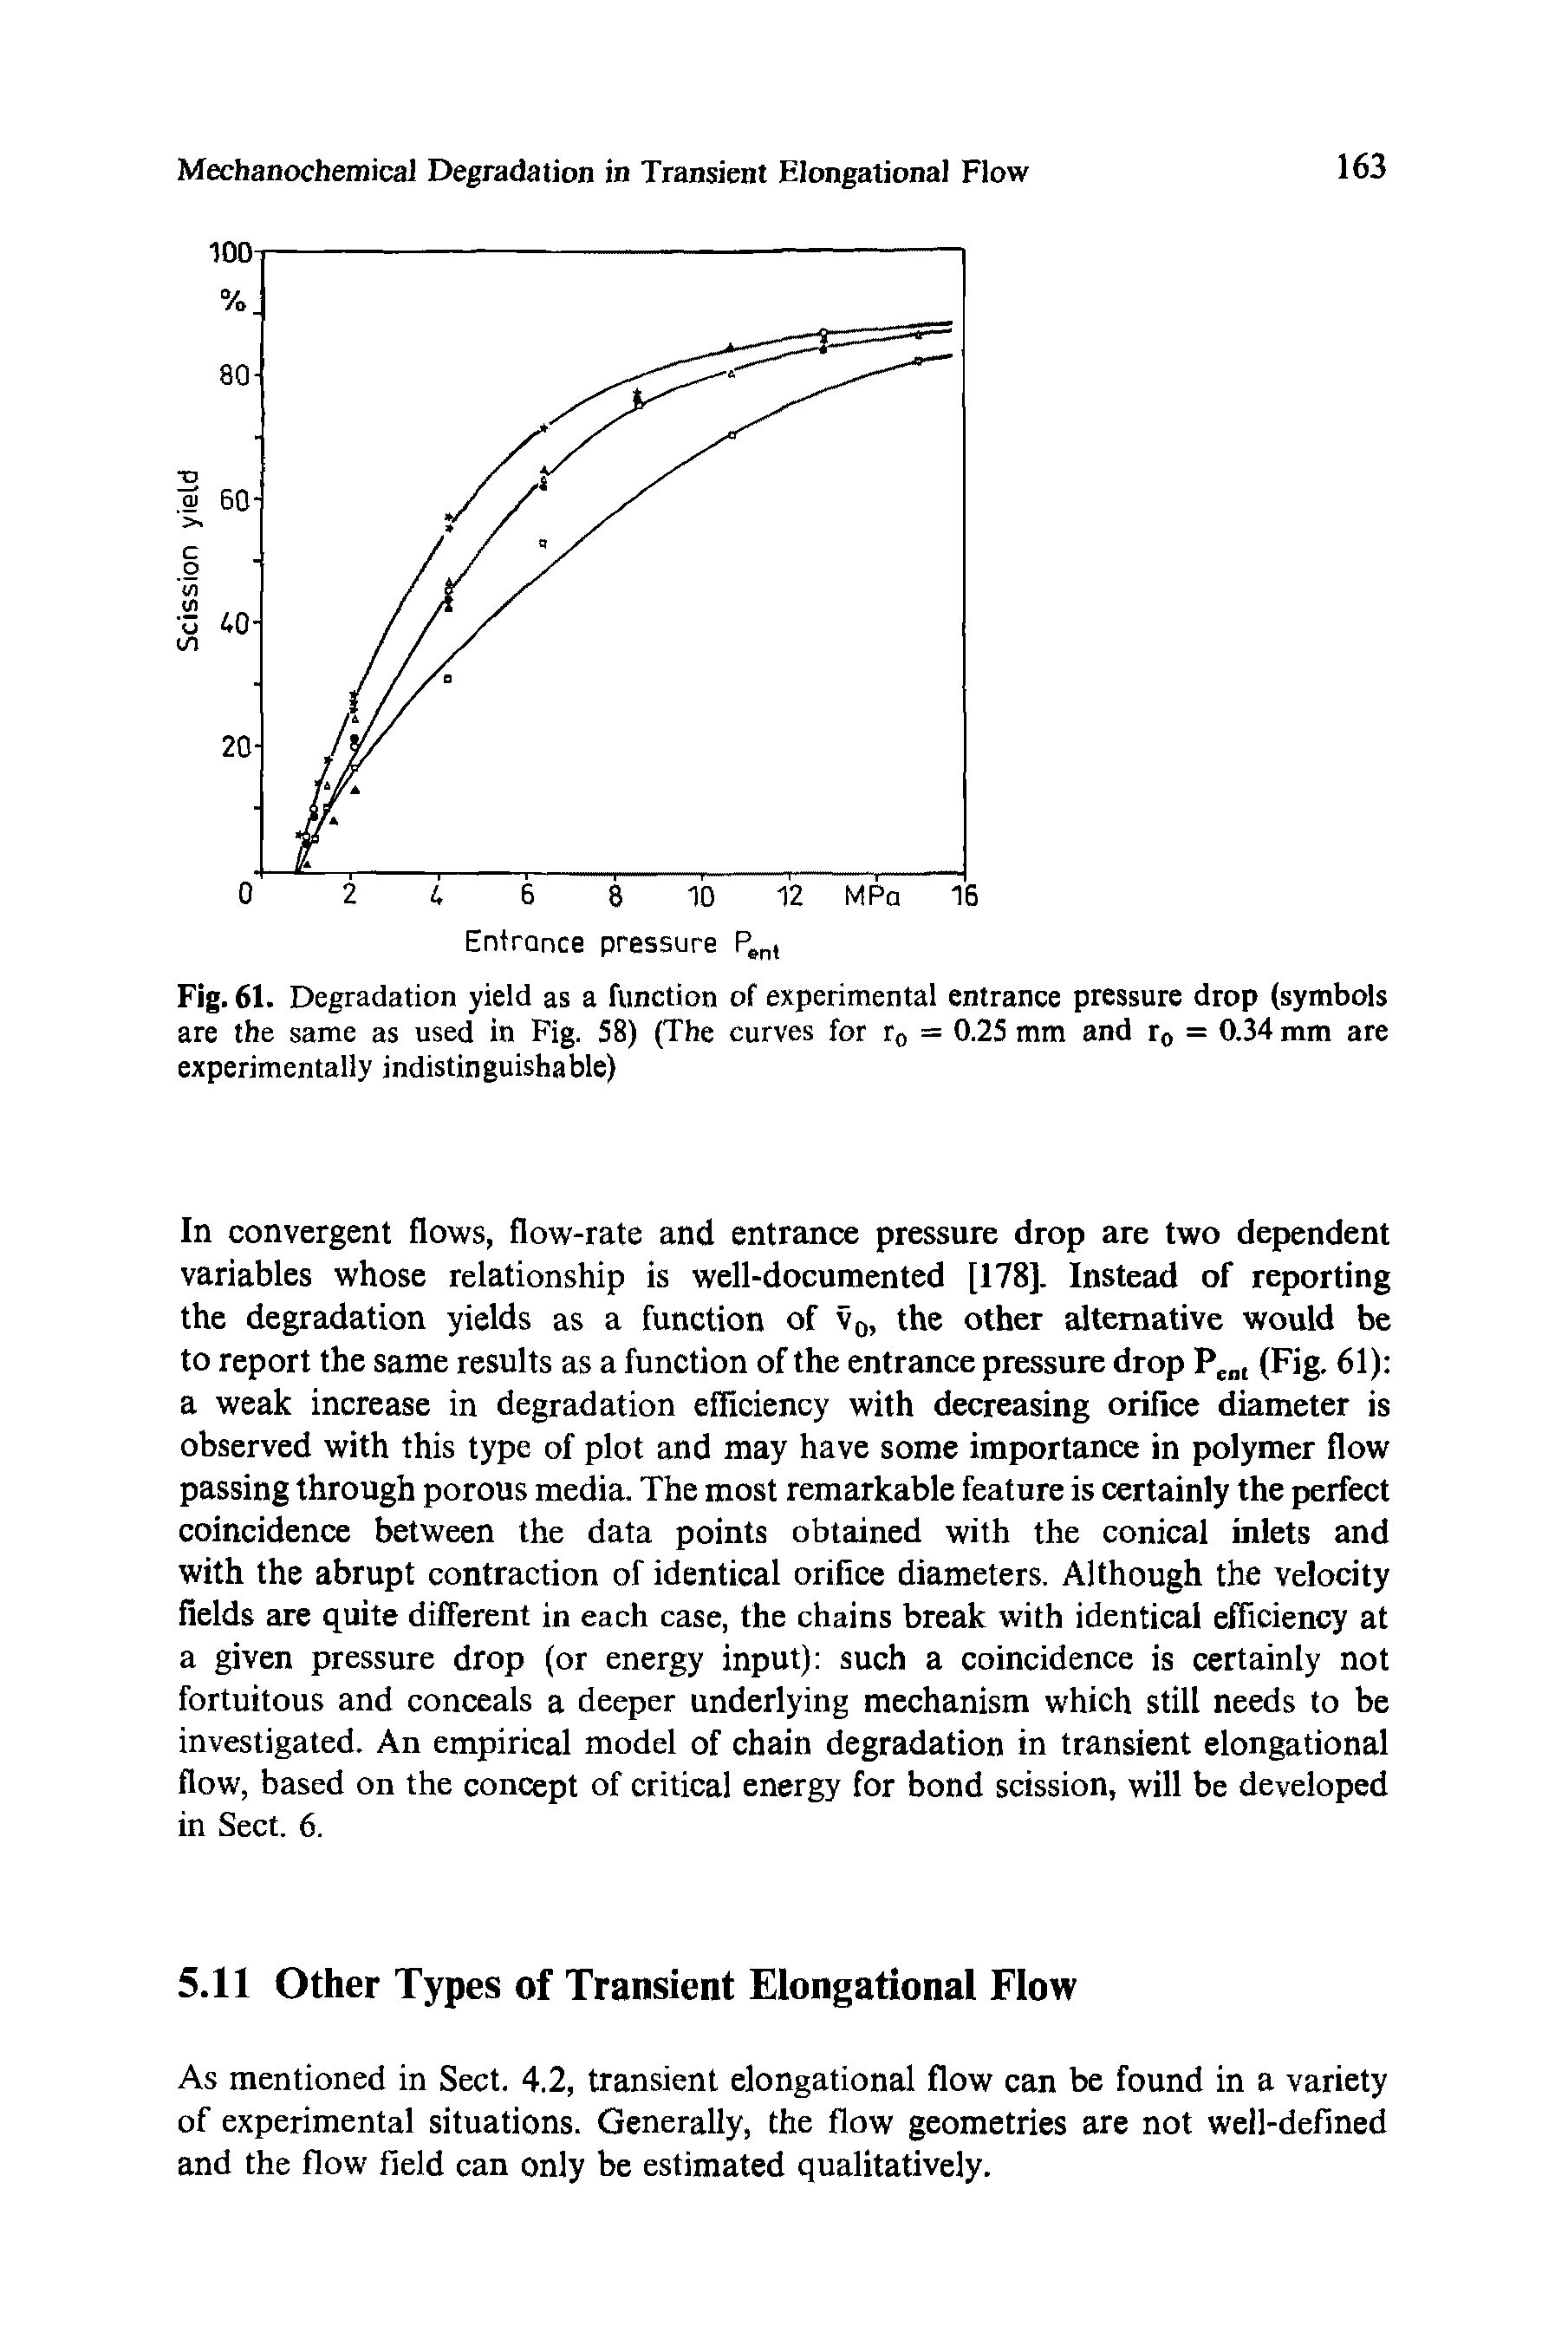 Fig. 61. Degradation yield as a function of experimental entrance pressure drop (symbols are the same as used in Fig. 58) (The curves for r0 = 0.25 mm and r0 = 0.34 mm are experimentally indistin guisha ble)...